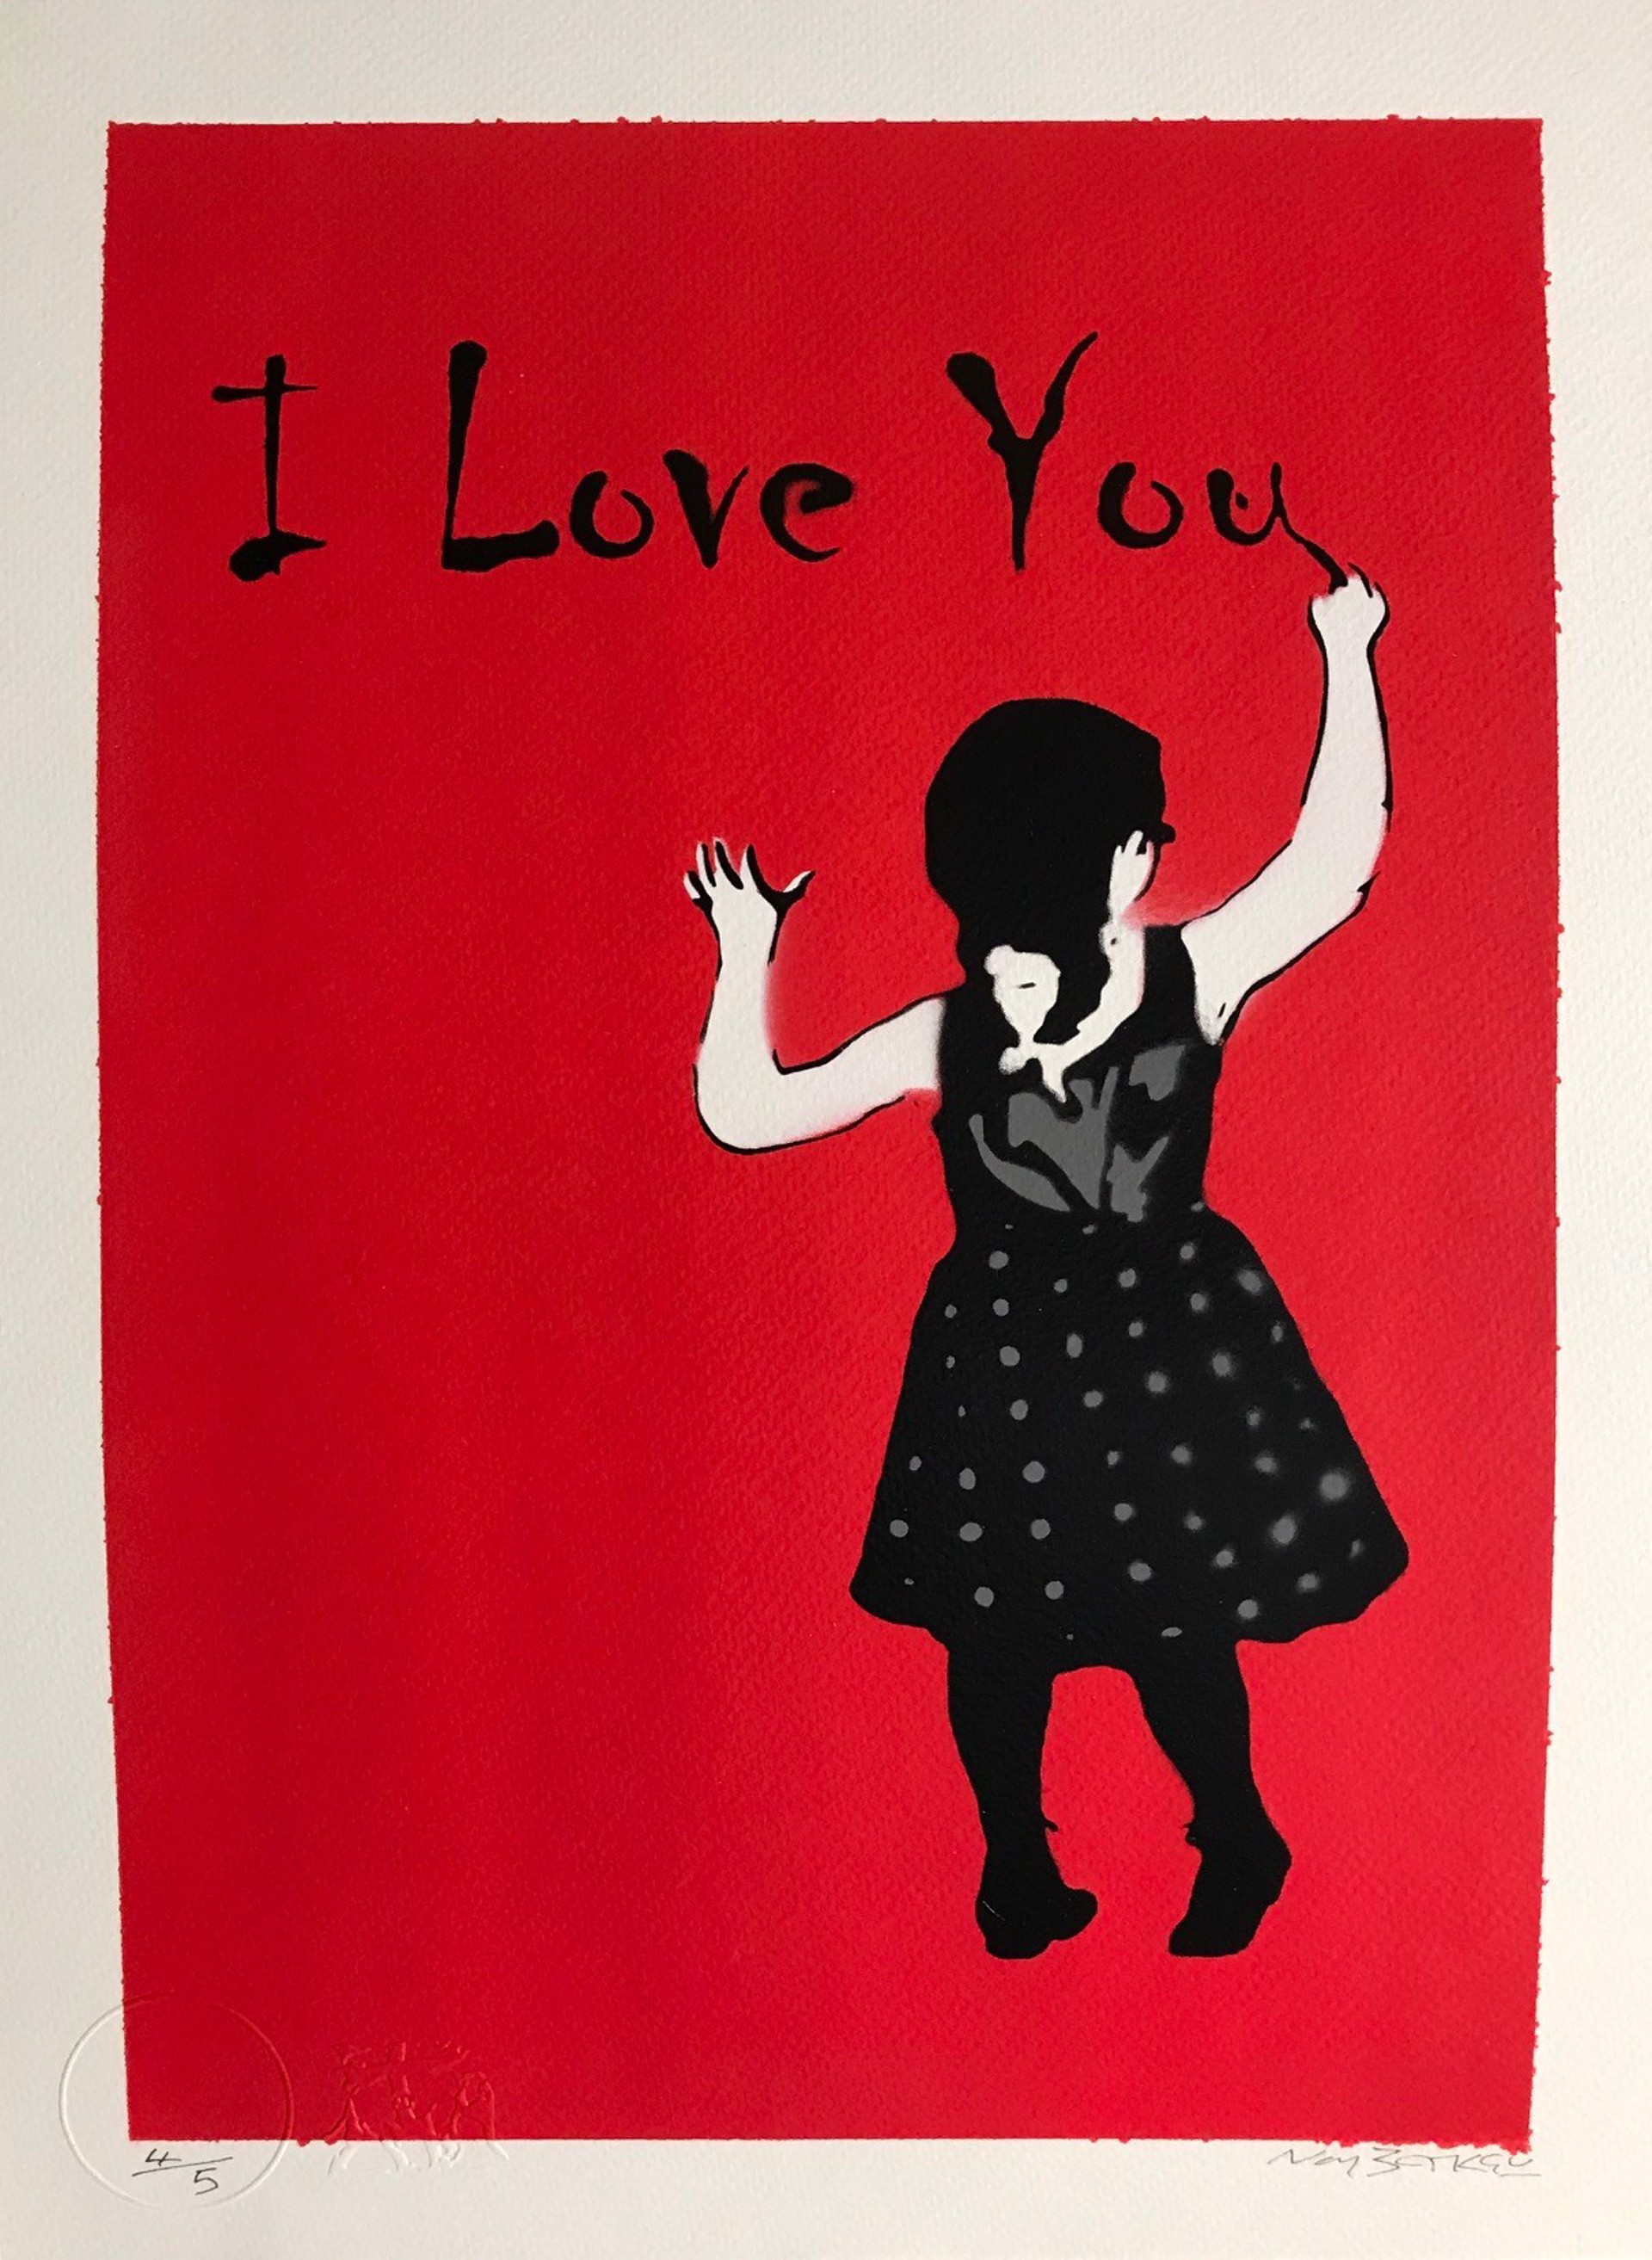 I Love You (Red) by Not Banksy